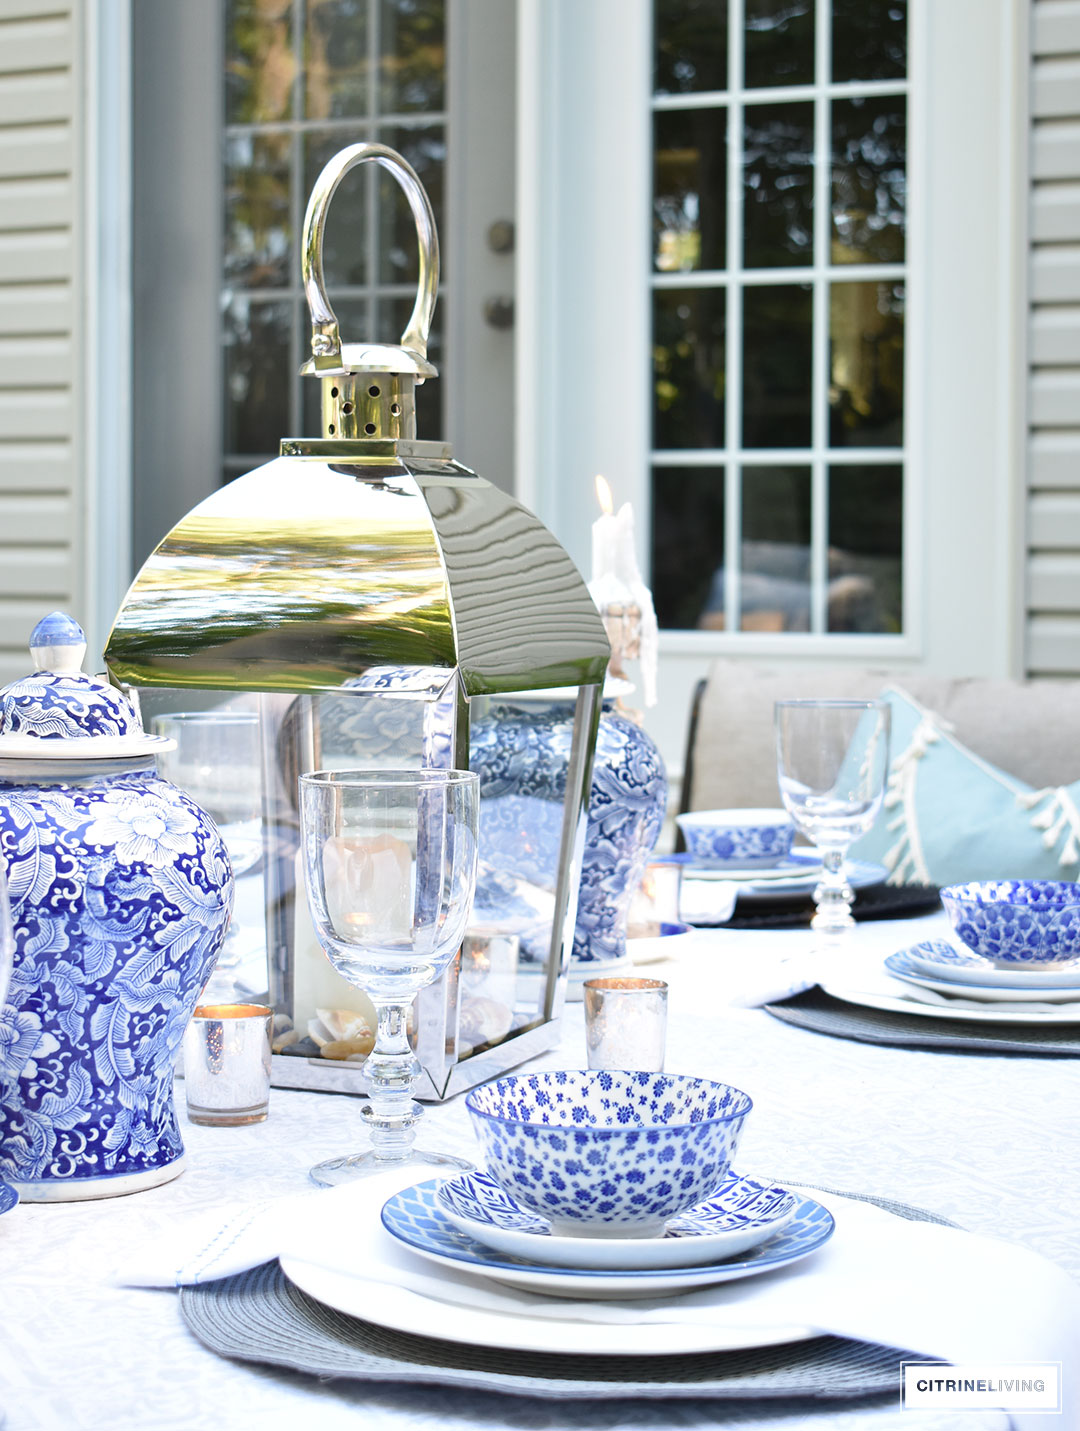 An outdoor tablescape with blue and white ginger jars and a mix of blue and white patterned dishes brings a casual yet elegant look to your outdoor space.